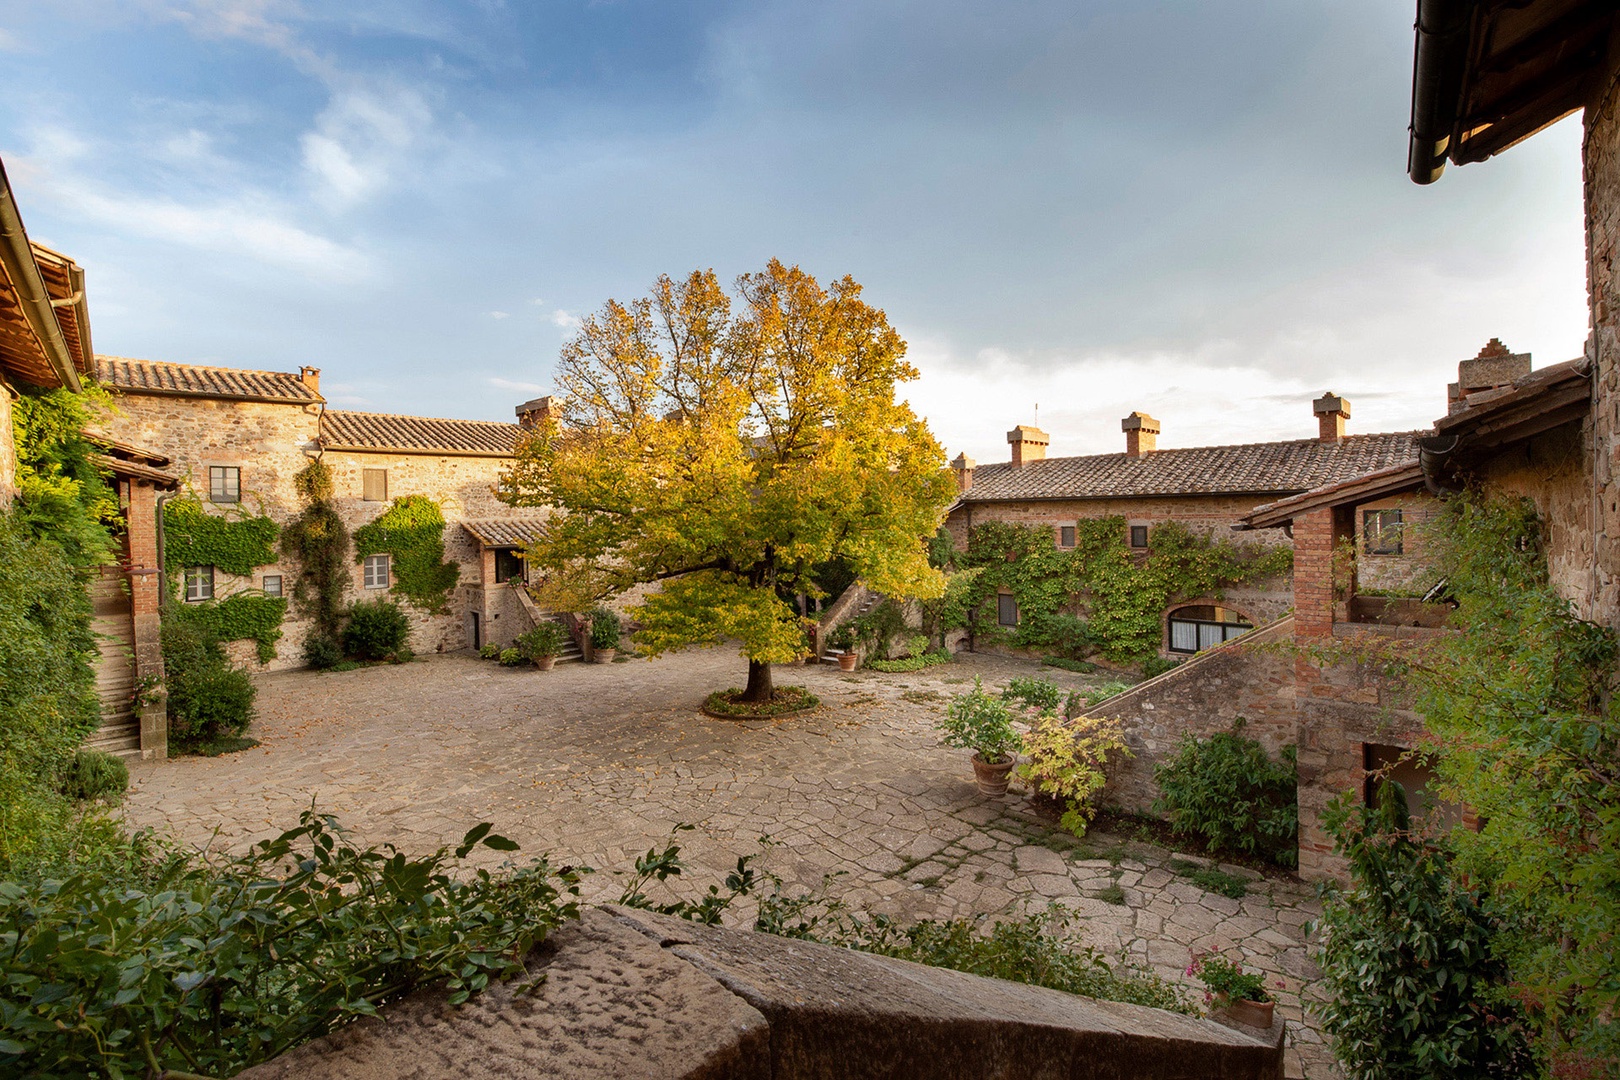 The courtyard of the Borgo estate welcomes you!